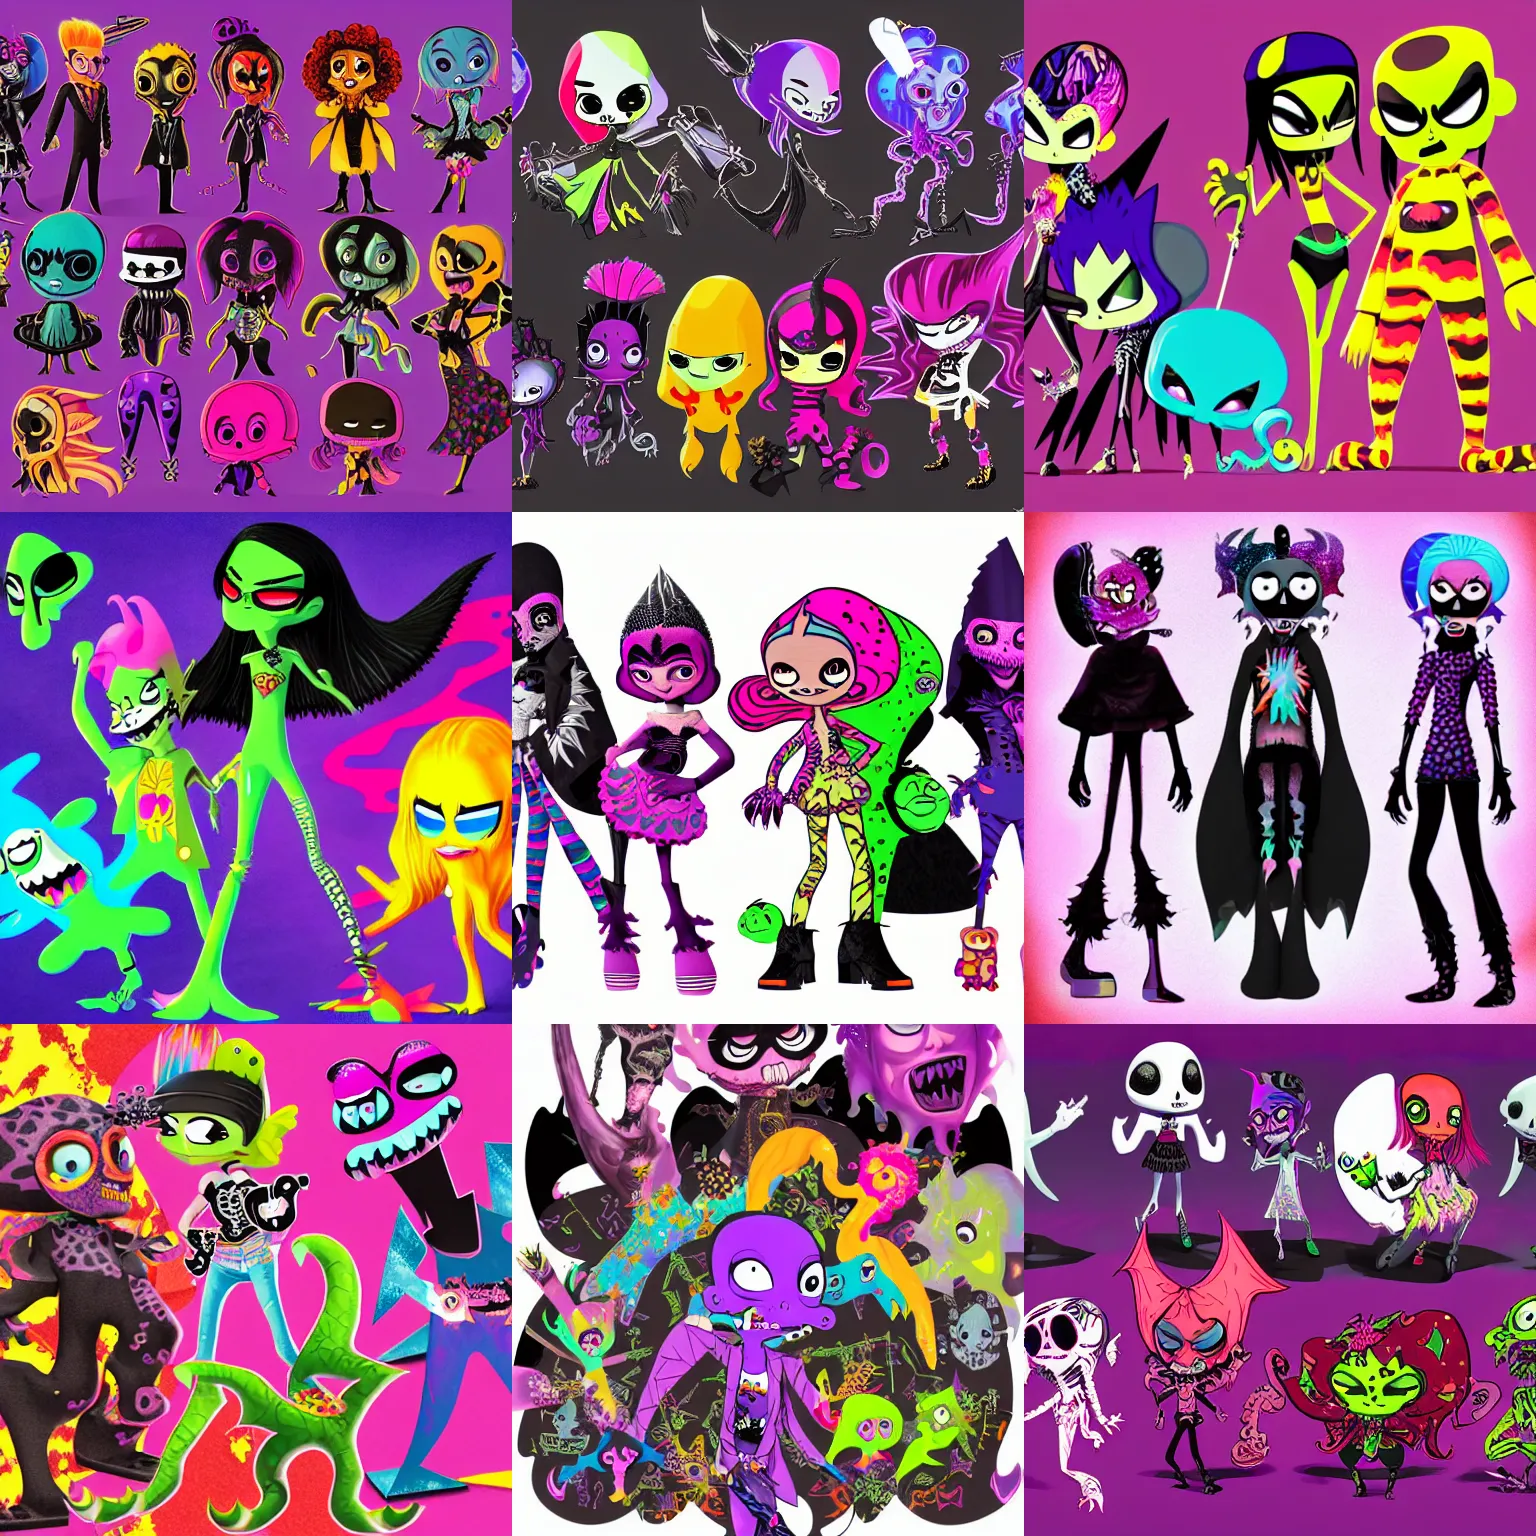 Prompt: lisa frank gothic punk vampiric rockstar vampire squid concept character designs of various shapes and sizes by genndy tartakovsky and the creators of fret nice at pieces interactive and splatoon by nintendo and the psychonauts by doublefine tim shafer artists for the new hotel transylvania film managed by pixar